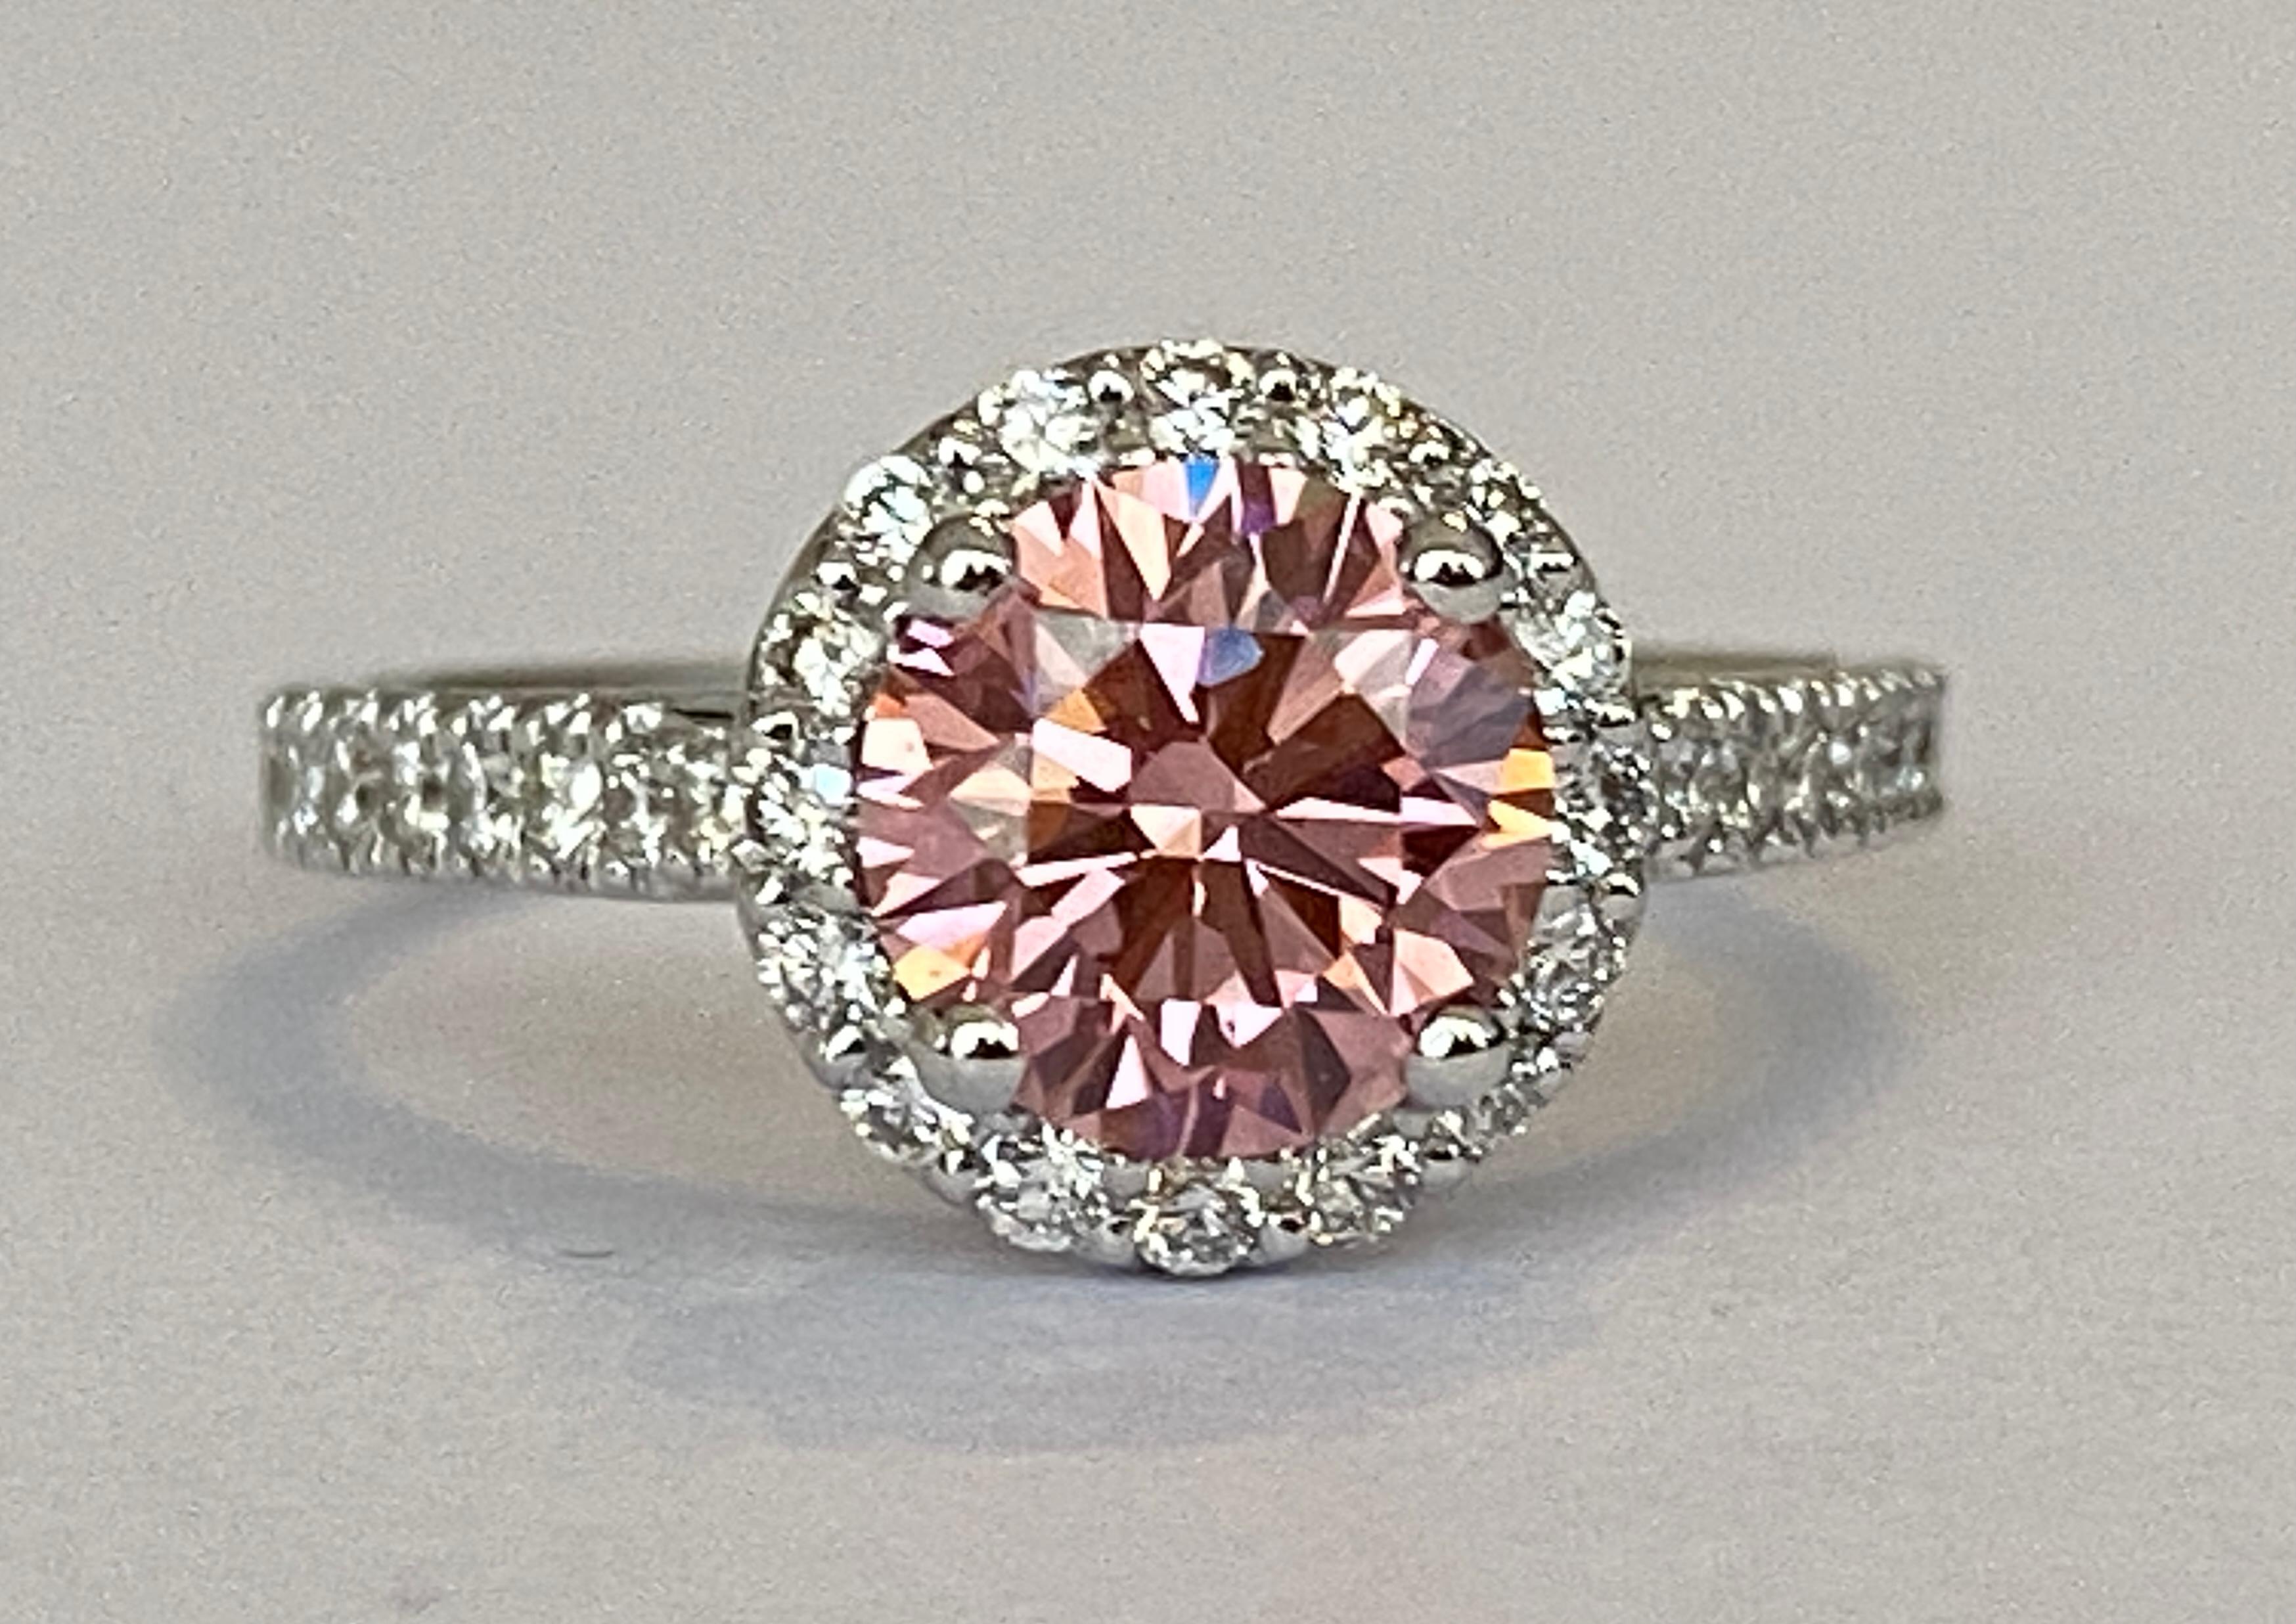 Offered: 18 carat white gold solitaire ring with 1.51crt  lab created brilliant cut fansy vivid pink diamond of quality VS1 and 32 pieces of natural brilliant cut diamonds in total approx. 0.45 crt G/VS/SI. 
Grade: 18 KT (stamped 750)
Weight: 3.9